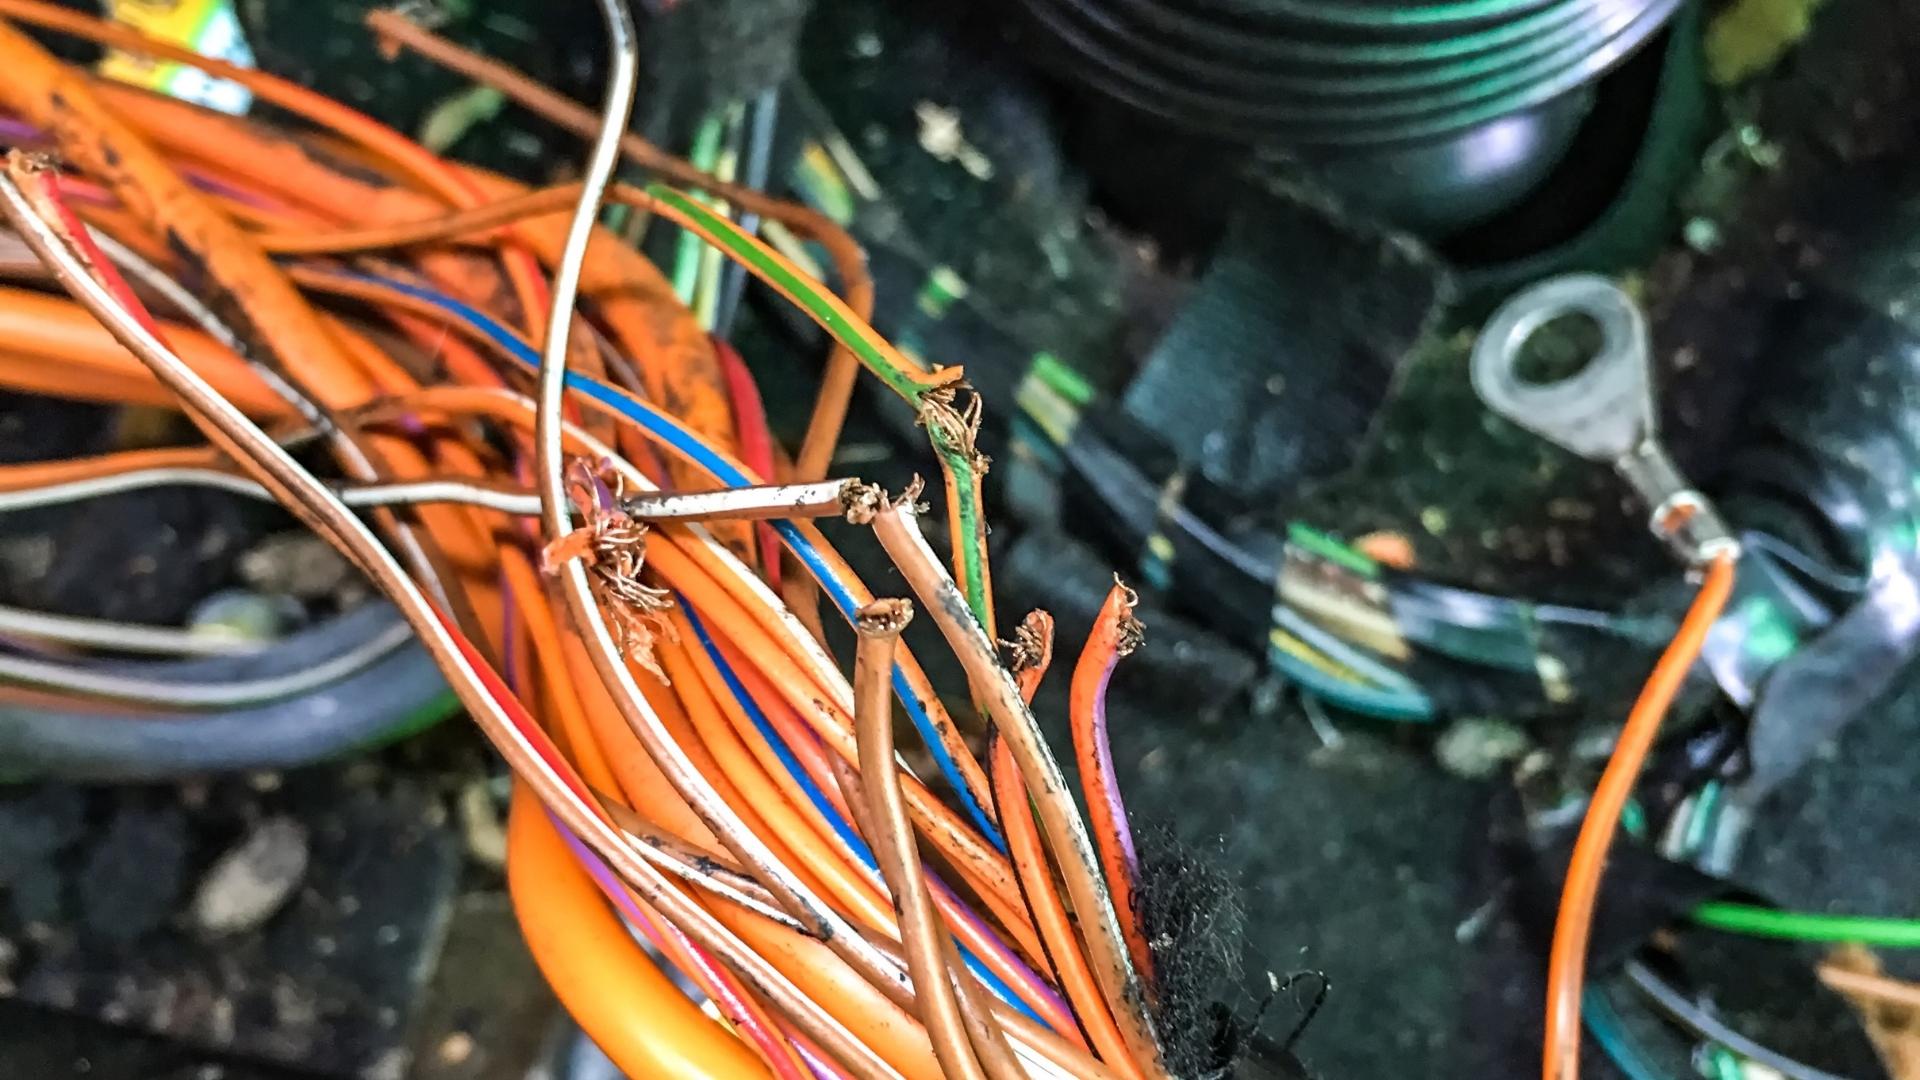 Rodent damage to chassis wiring